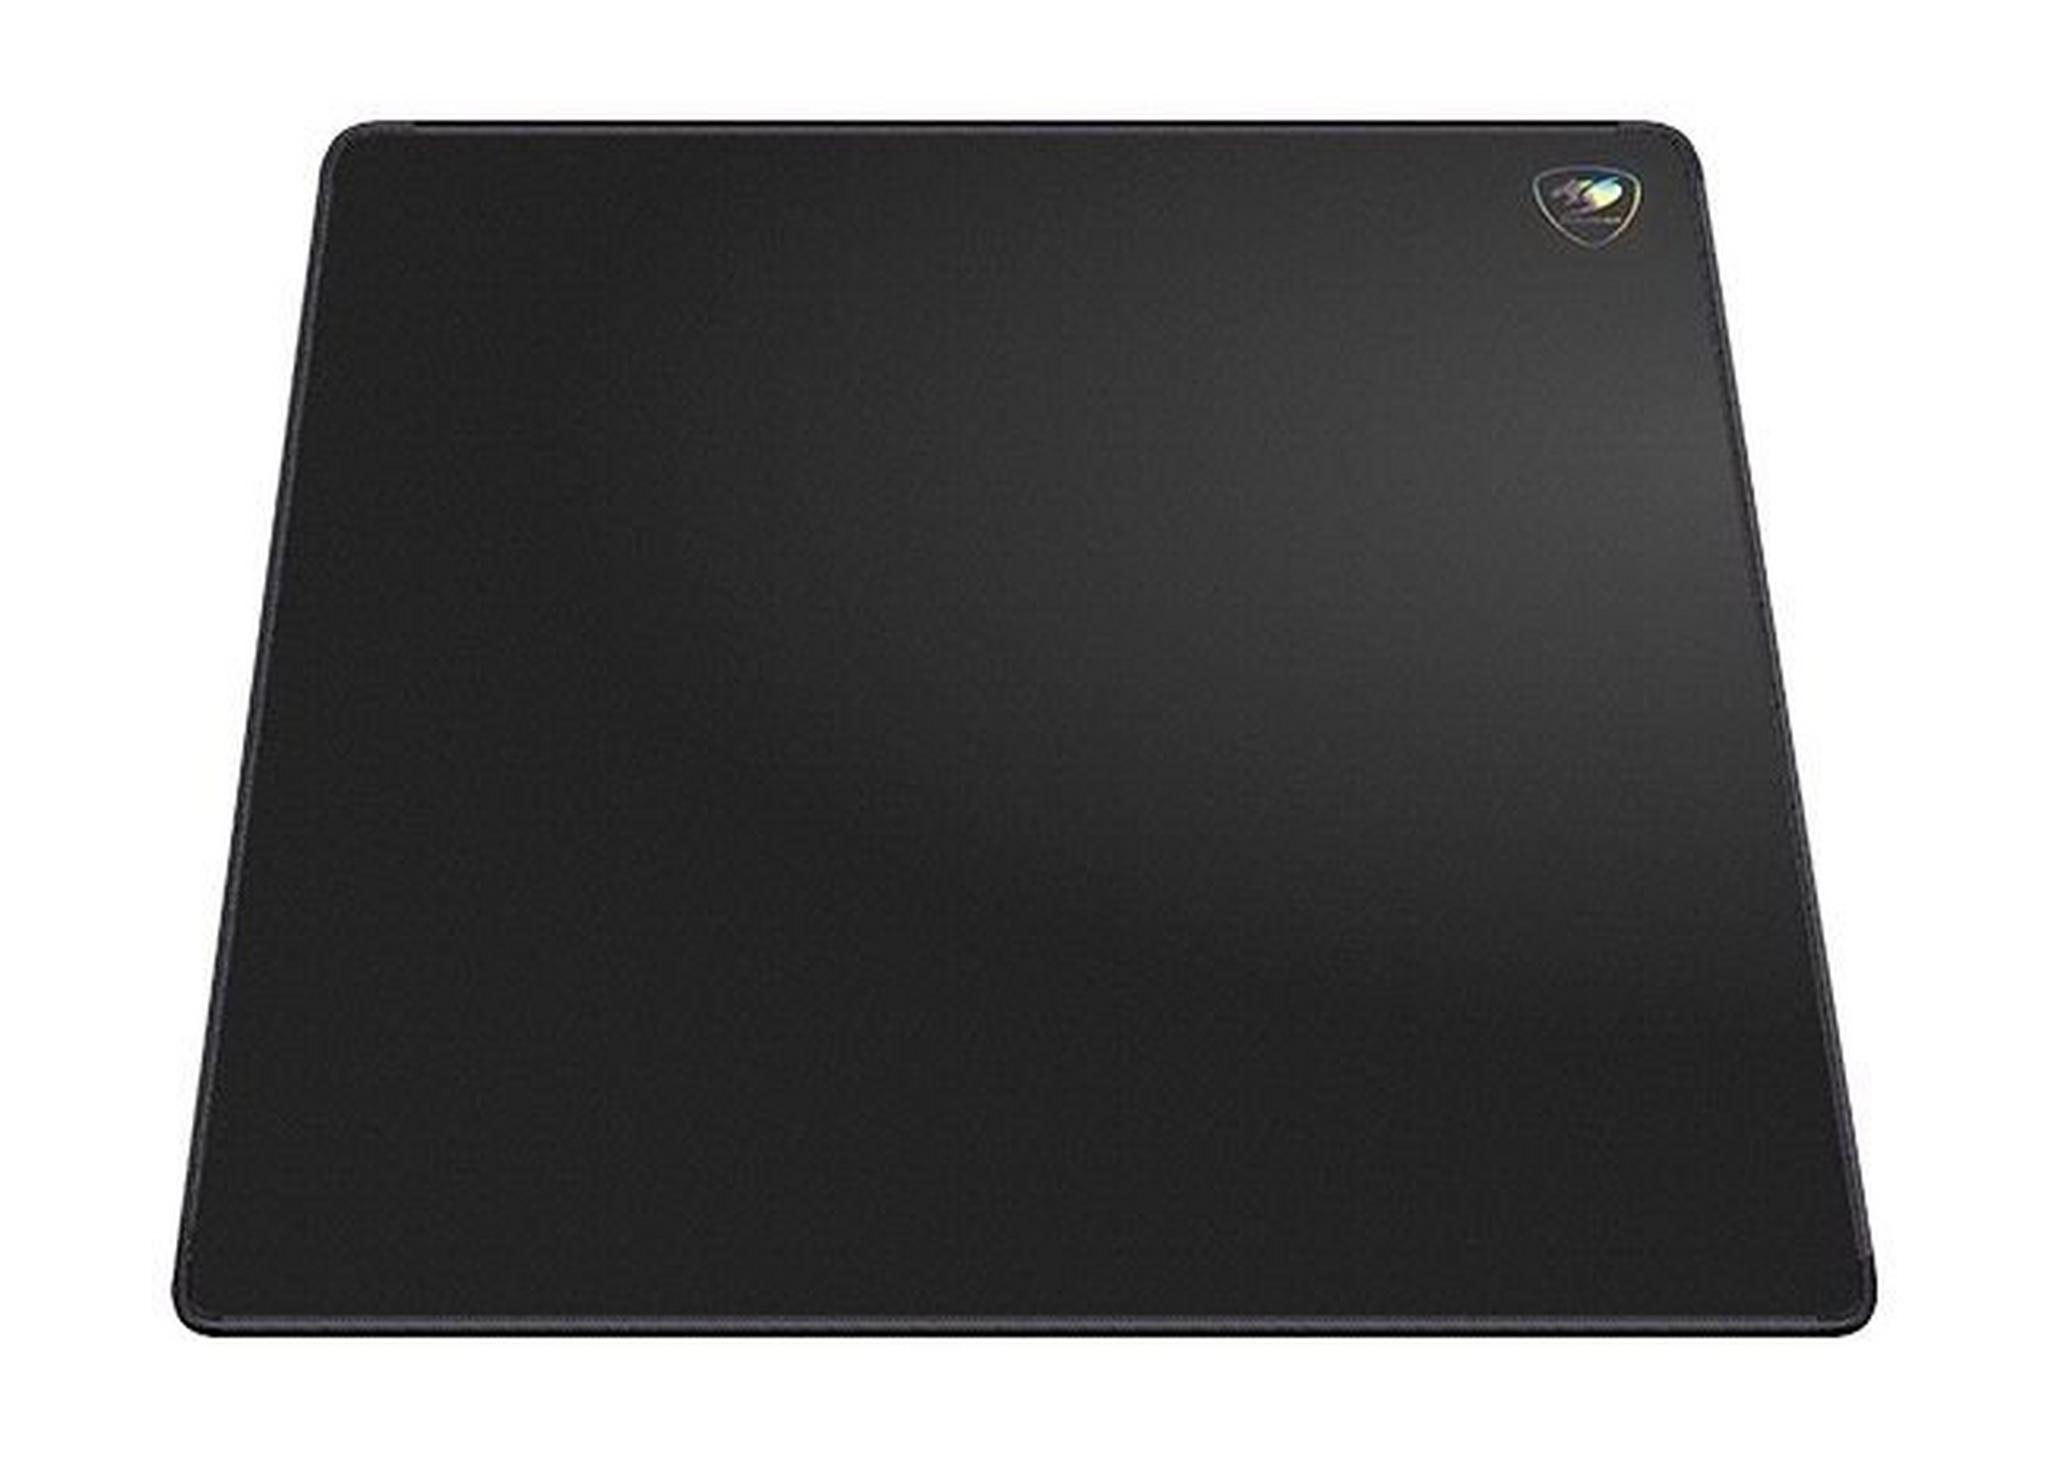 Cougar SPEED EX Gaming Mouse Pad - Black/Large